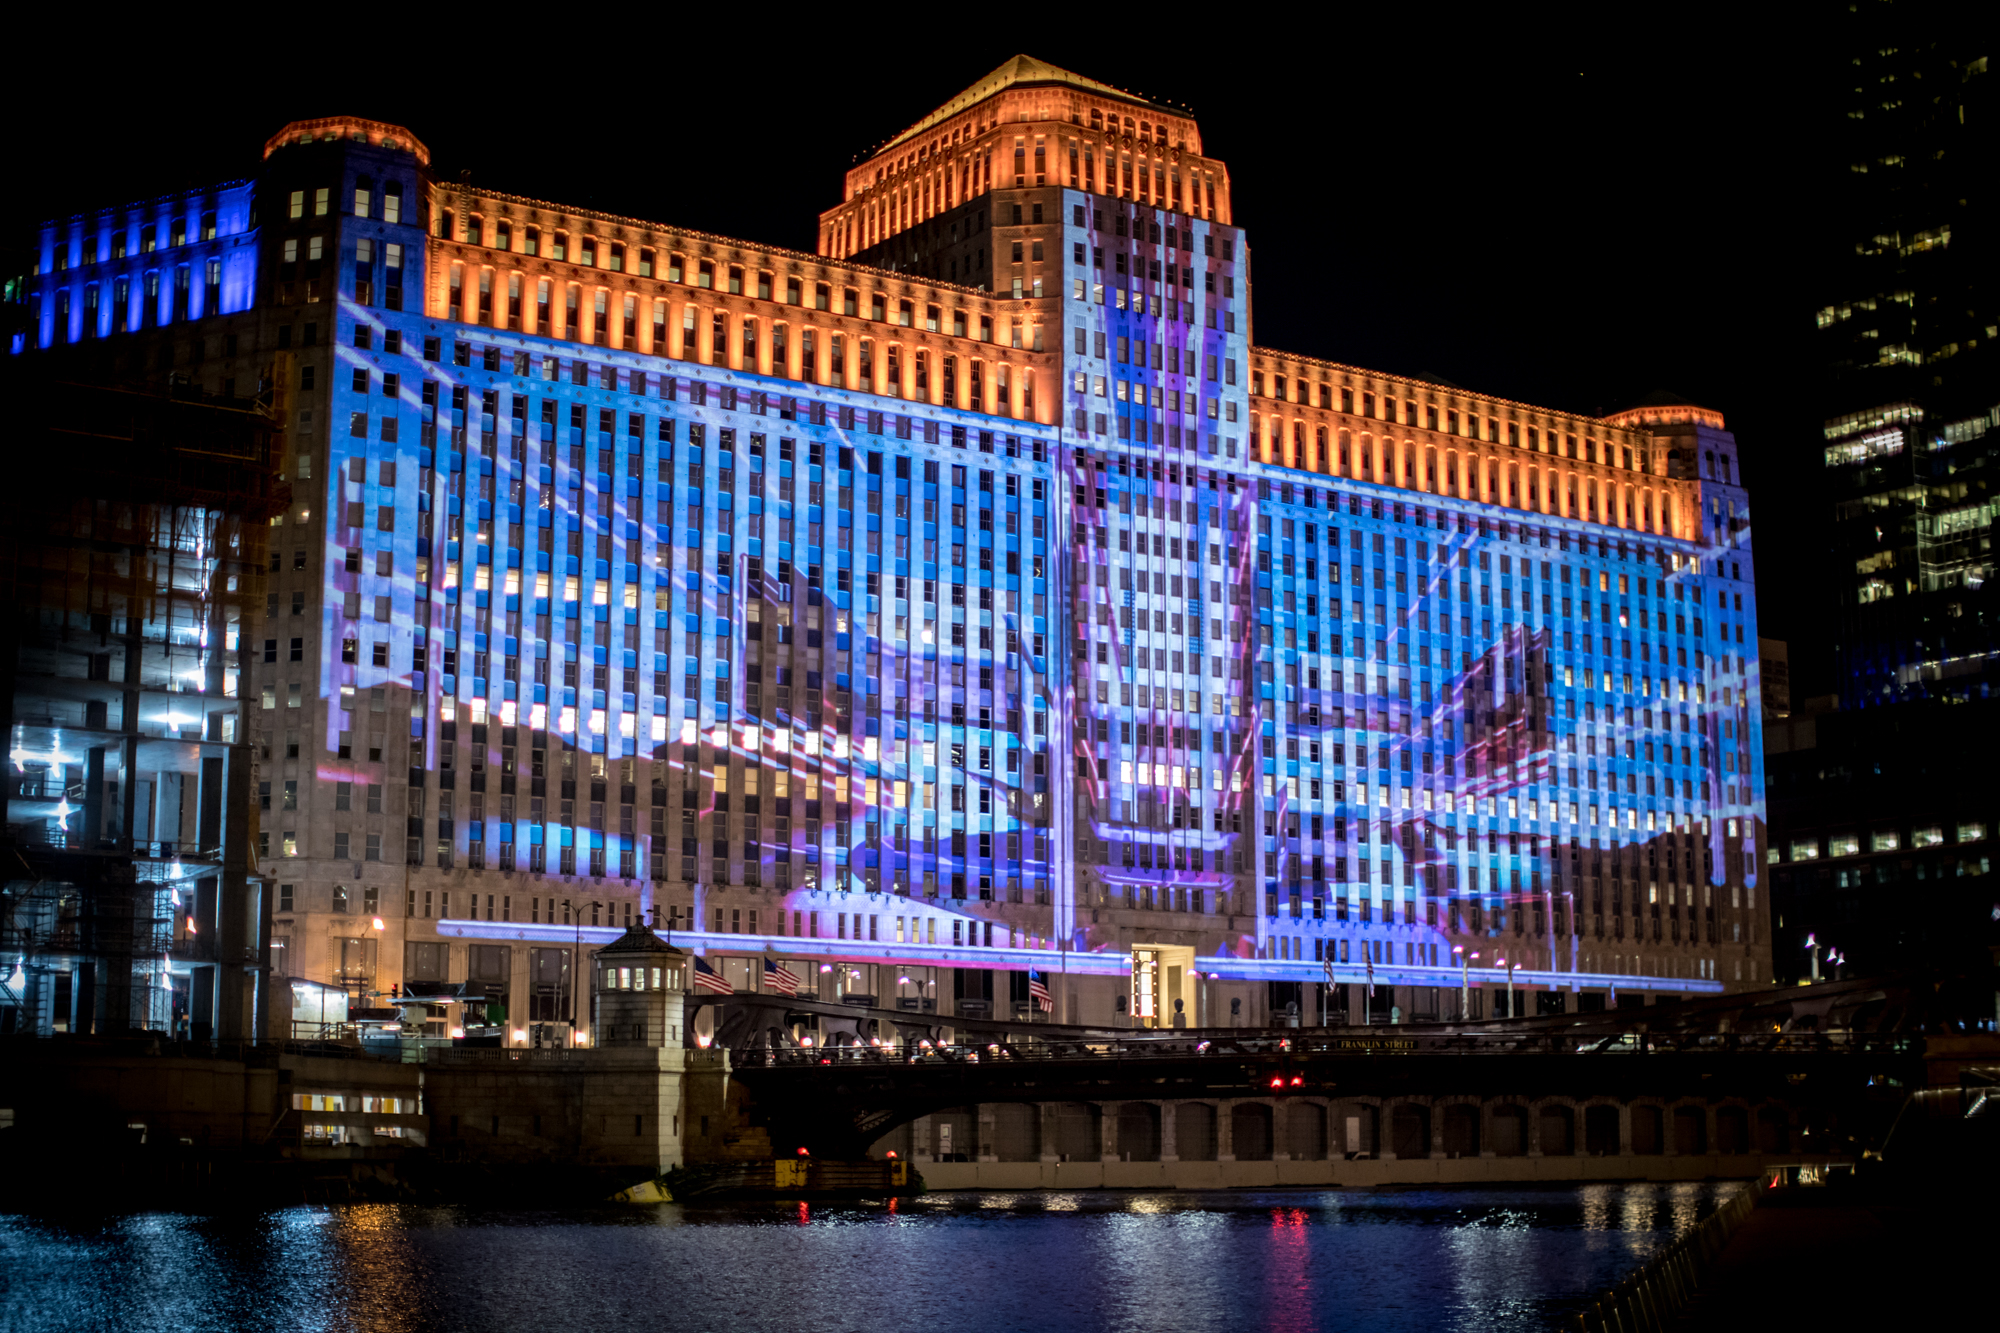 art projected on building facade by lighting design company